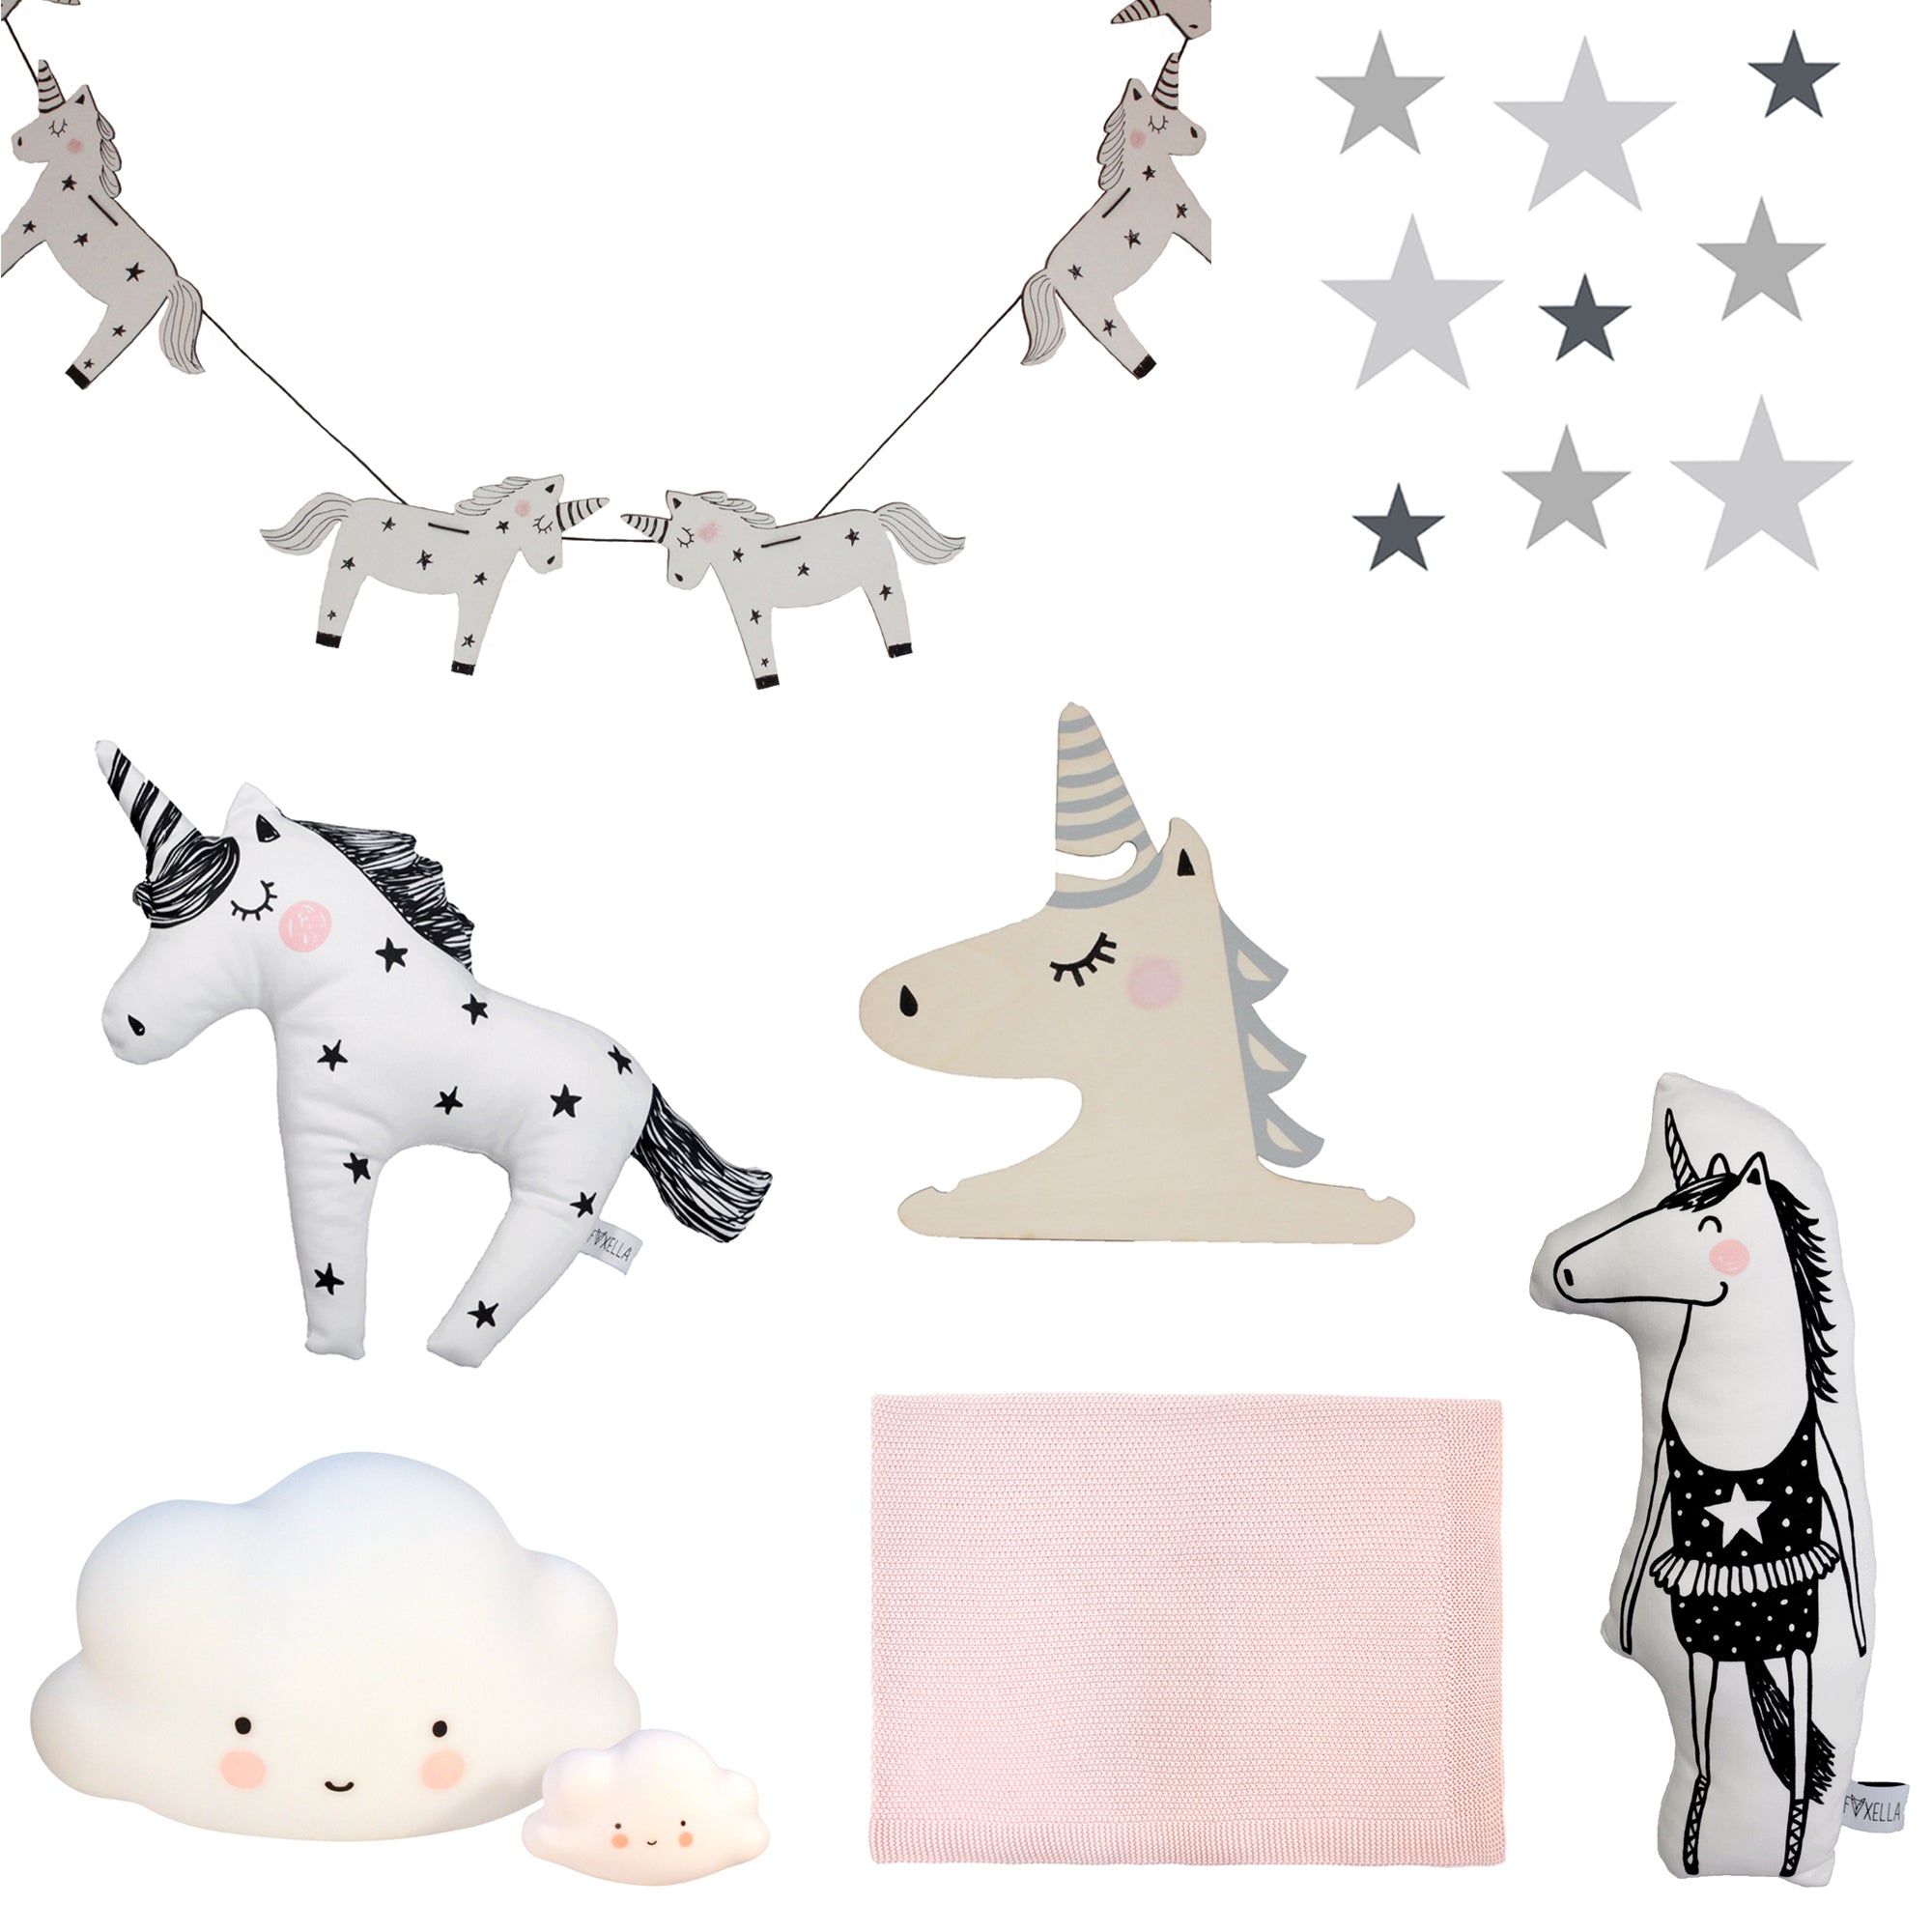 Stardust and Unicorns inspiration board by Bobby Rabbit.